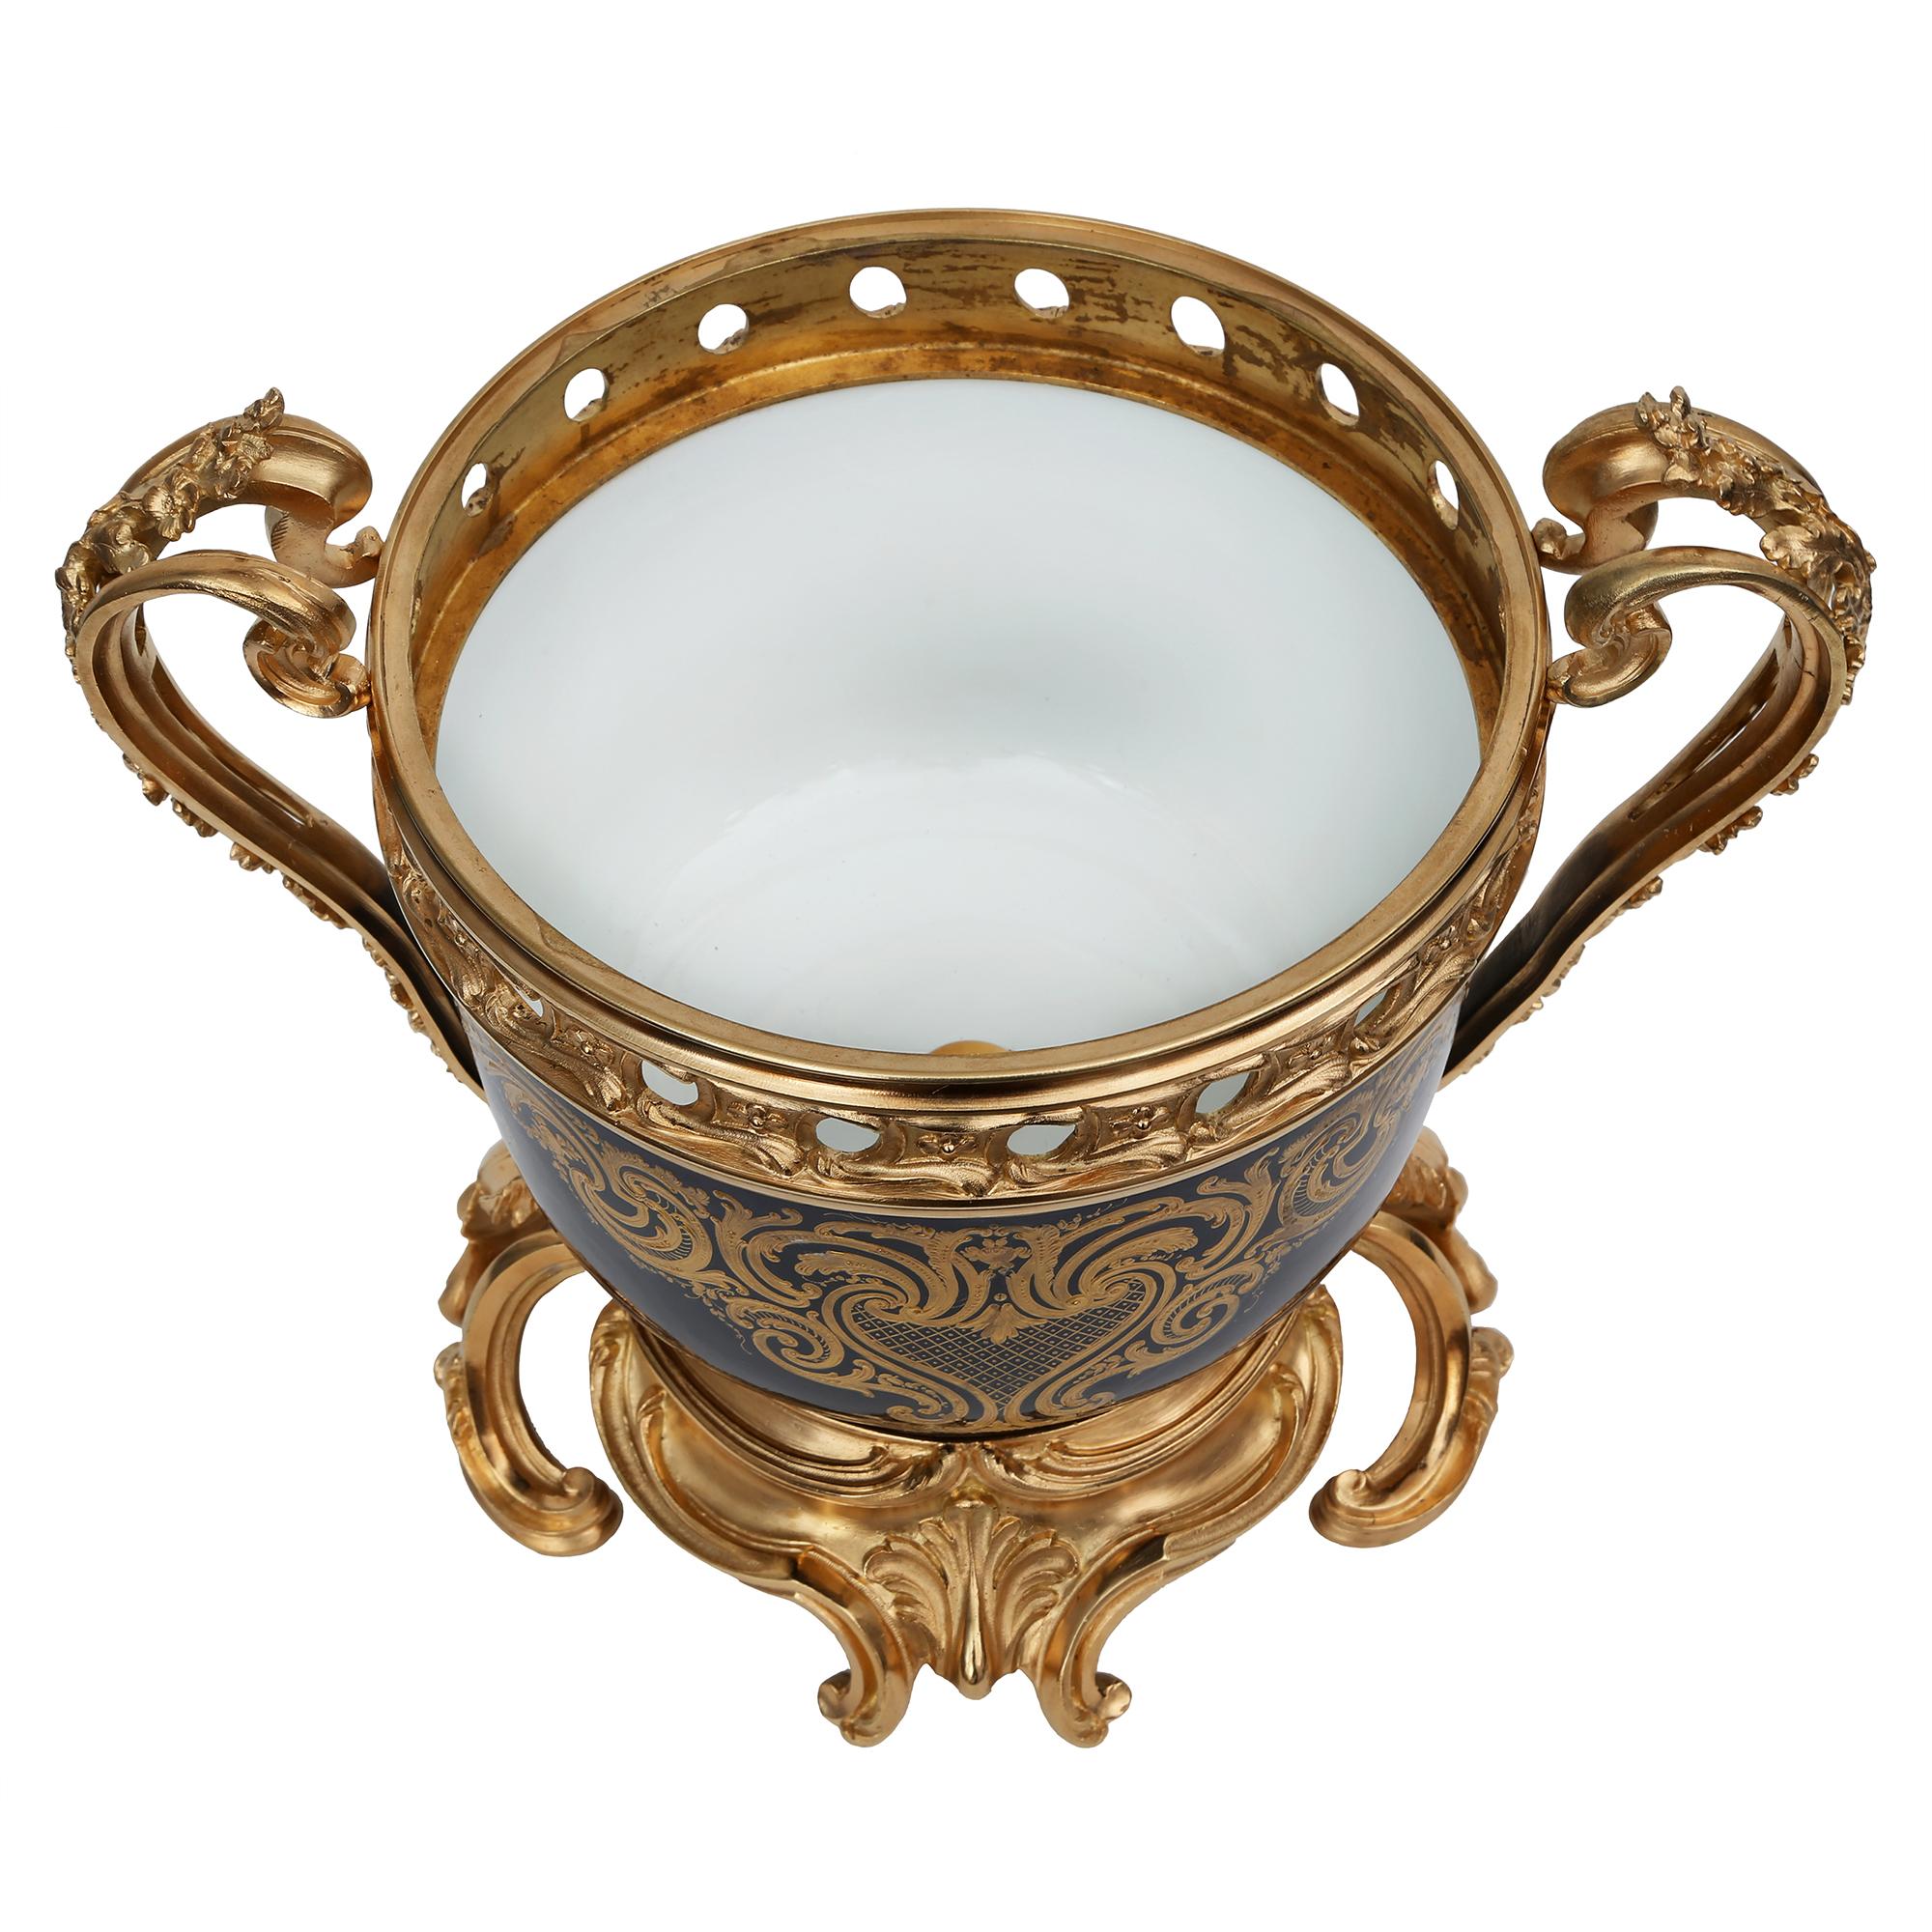 French 19th Century Louis XV Style Ormolu and Porcelain Tureen, Signed Sèvres In Good Condition For Sale In West Palm Beach, FL